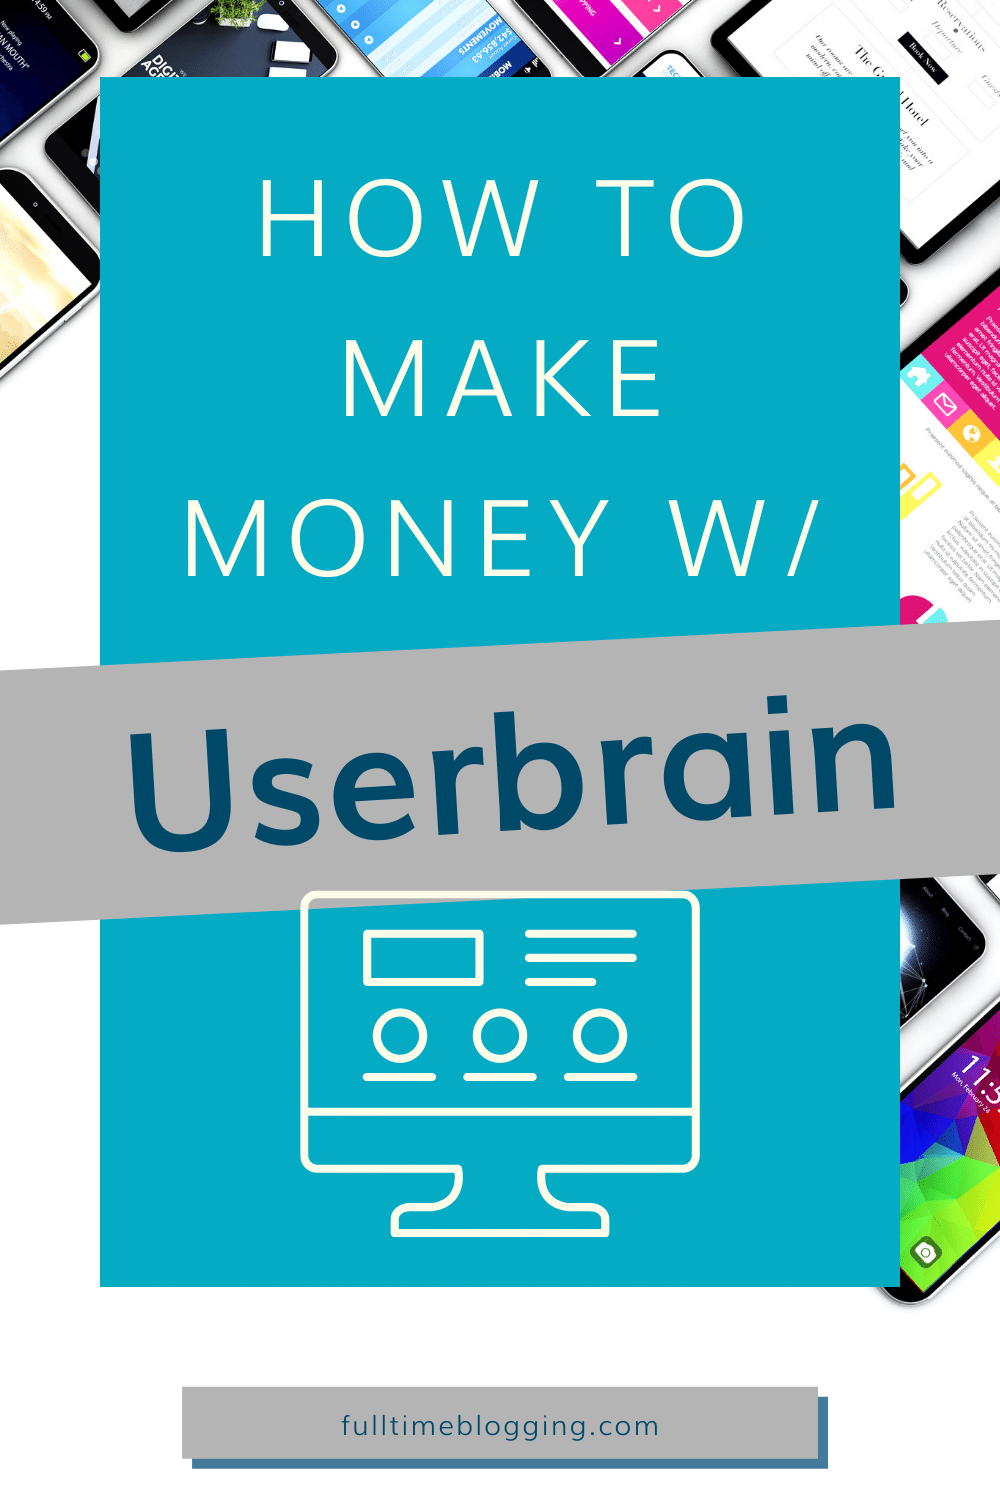 What Userbrain Is About